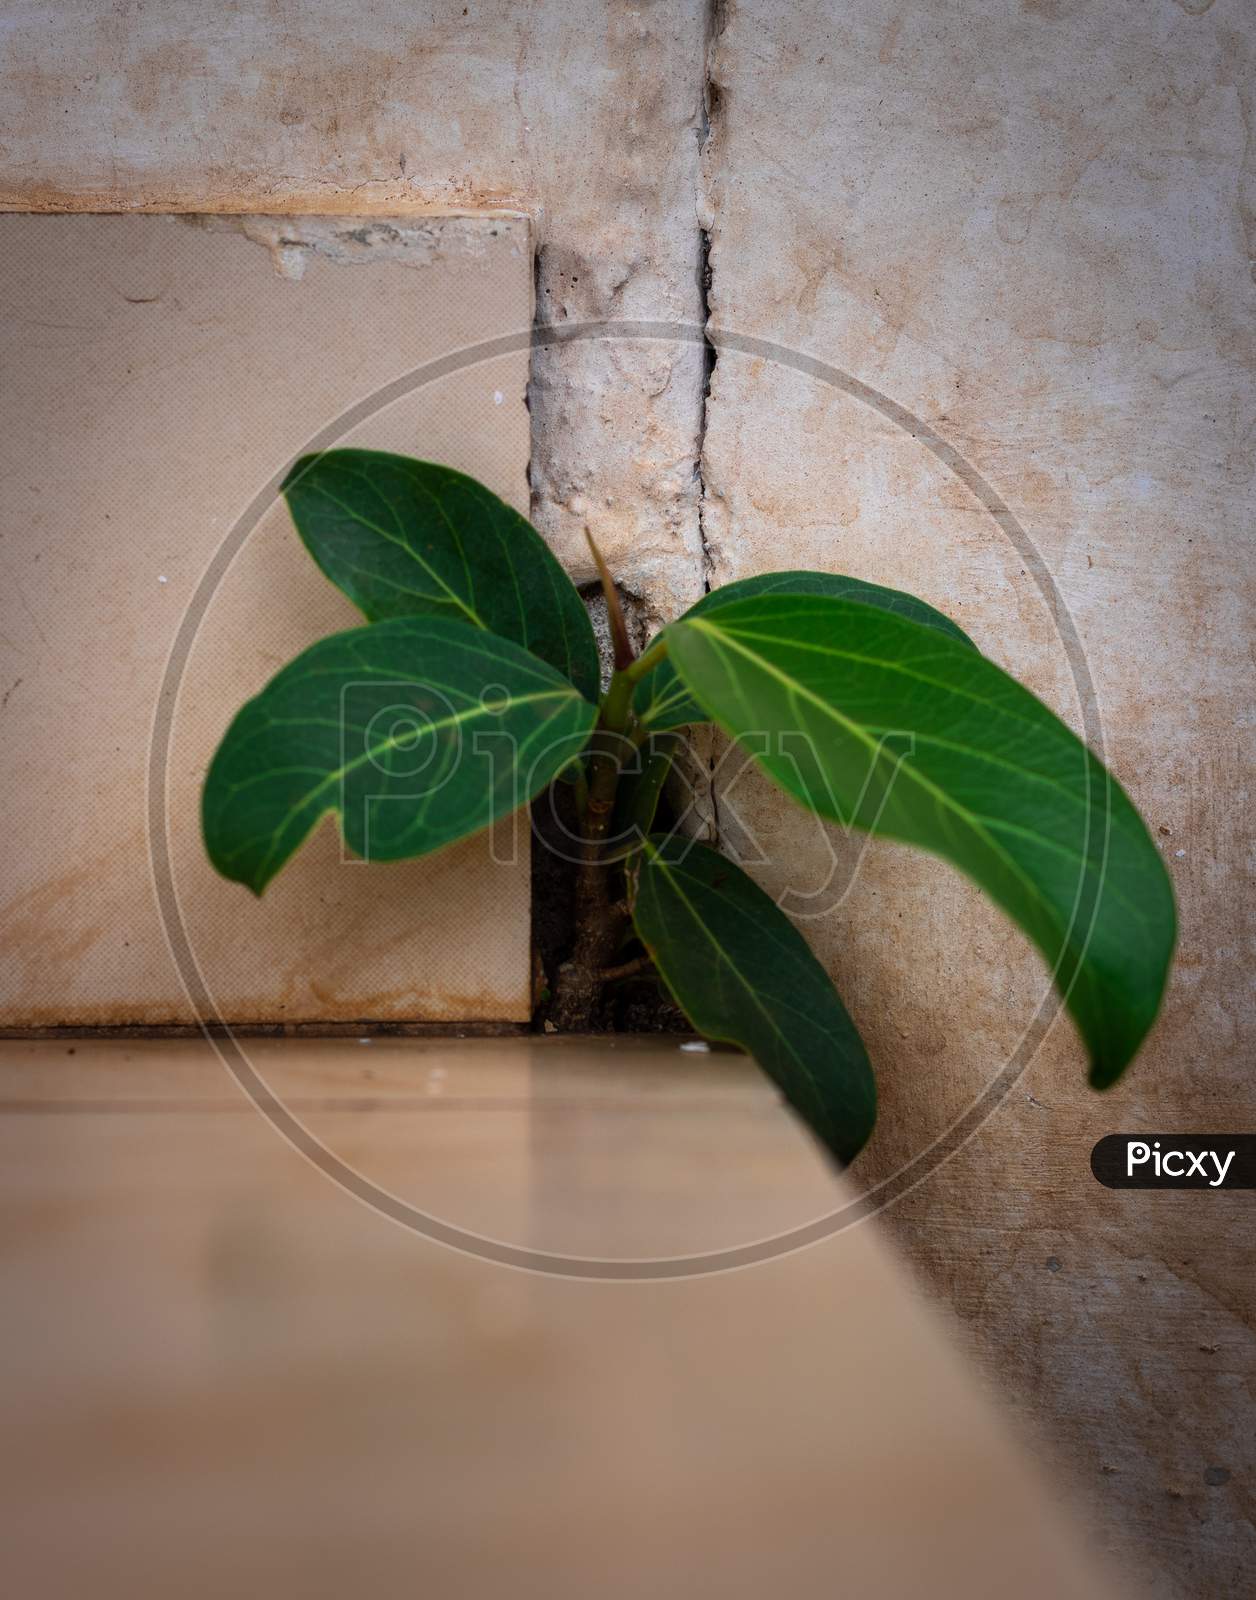 Banyan Tree Growing In Concrete Wall Holes Nature Act Of Growing